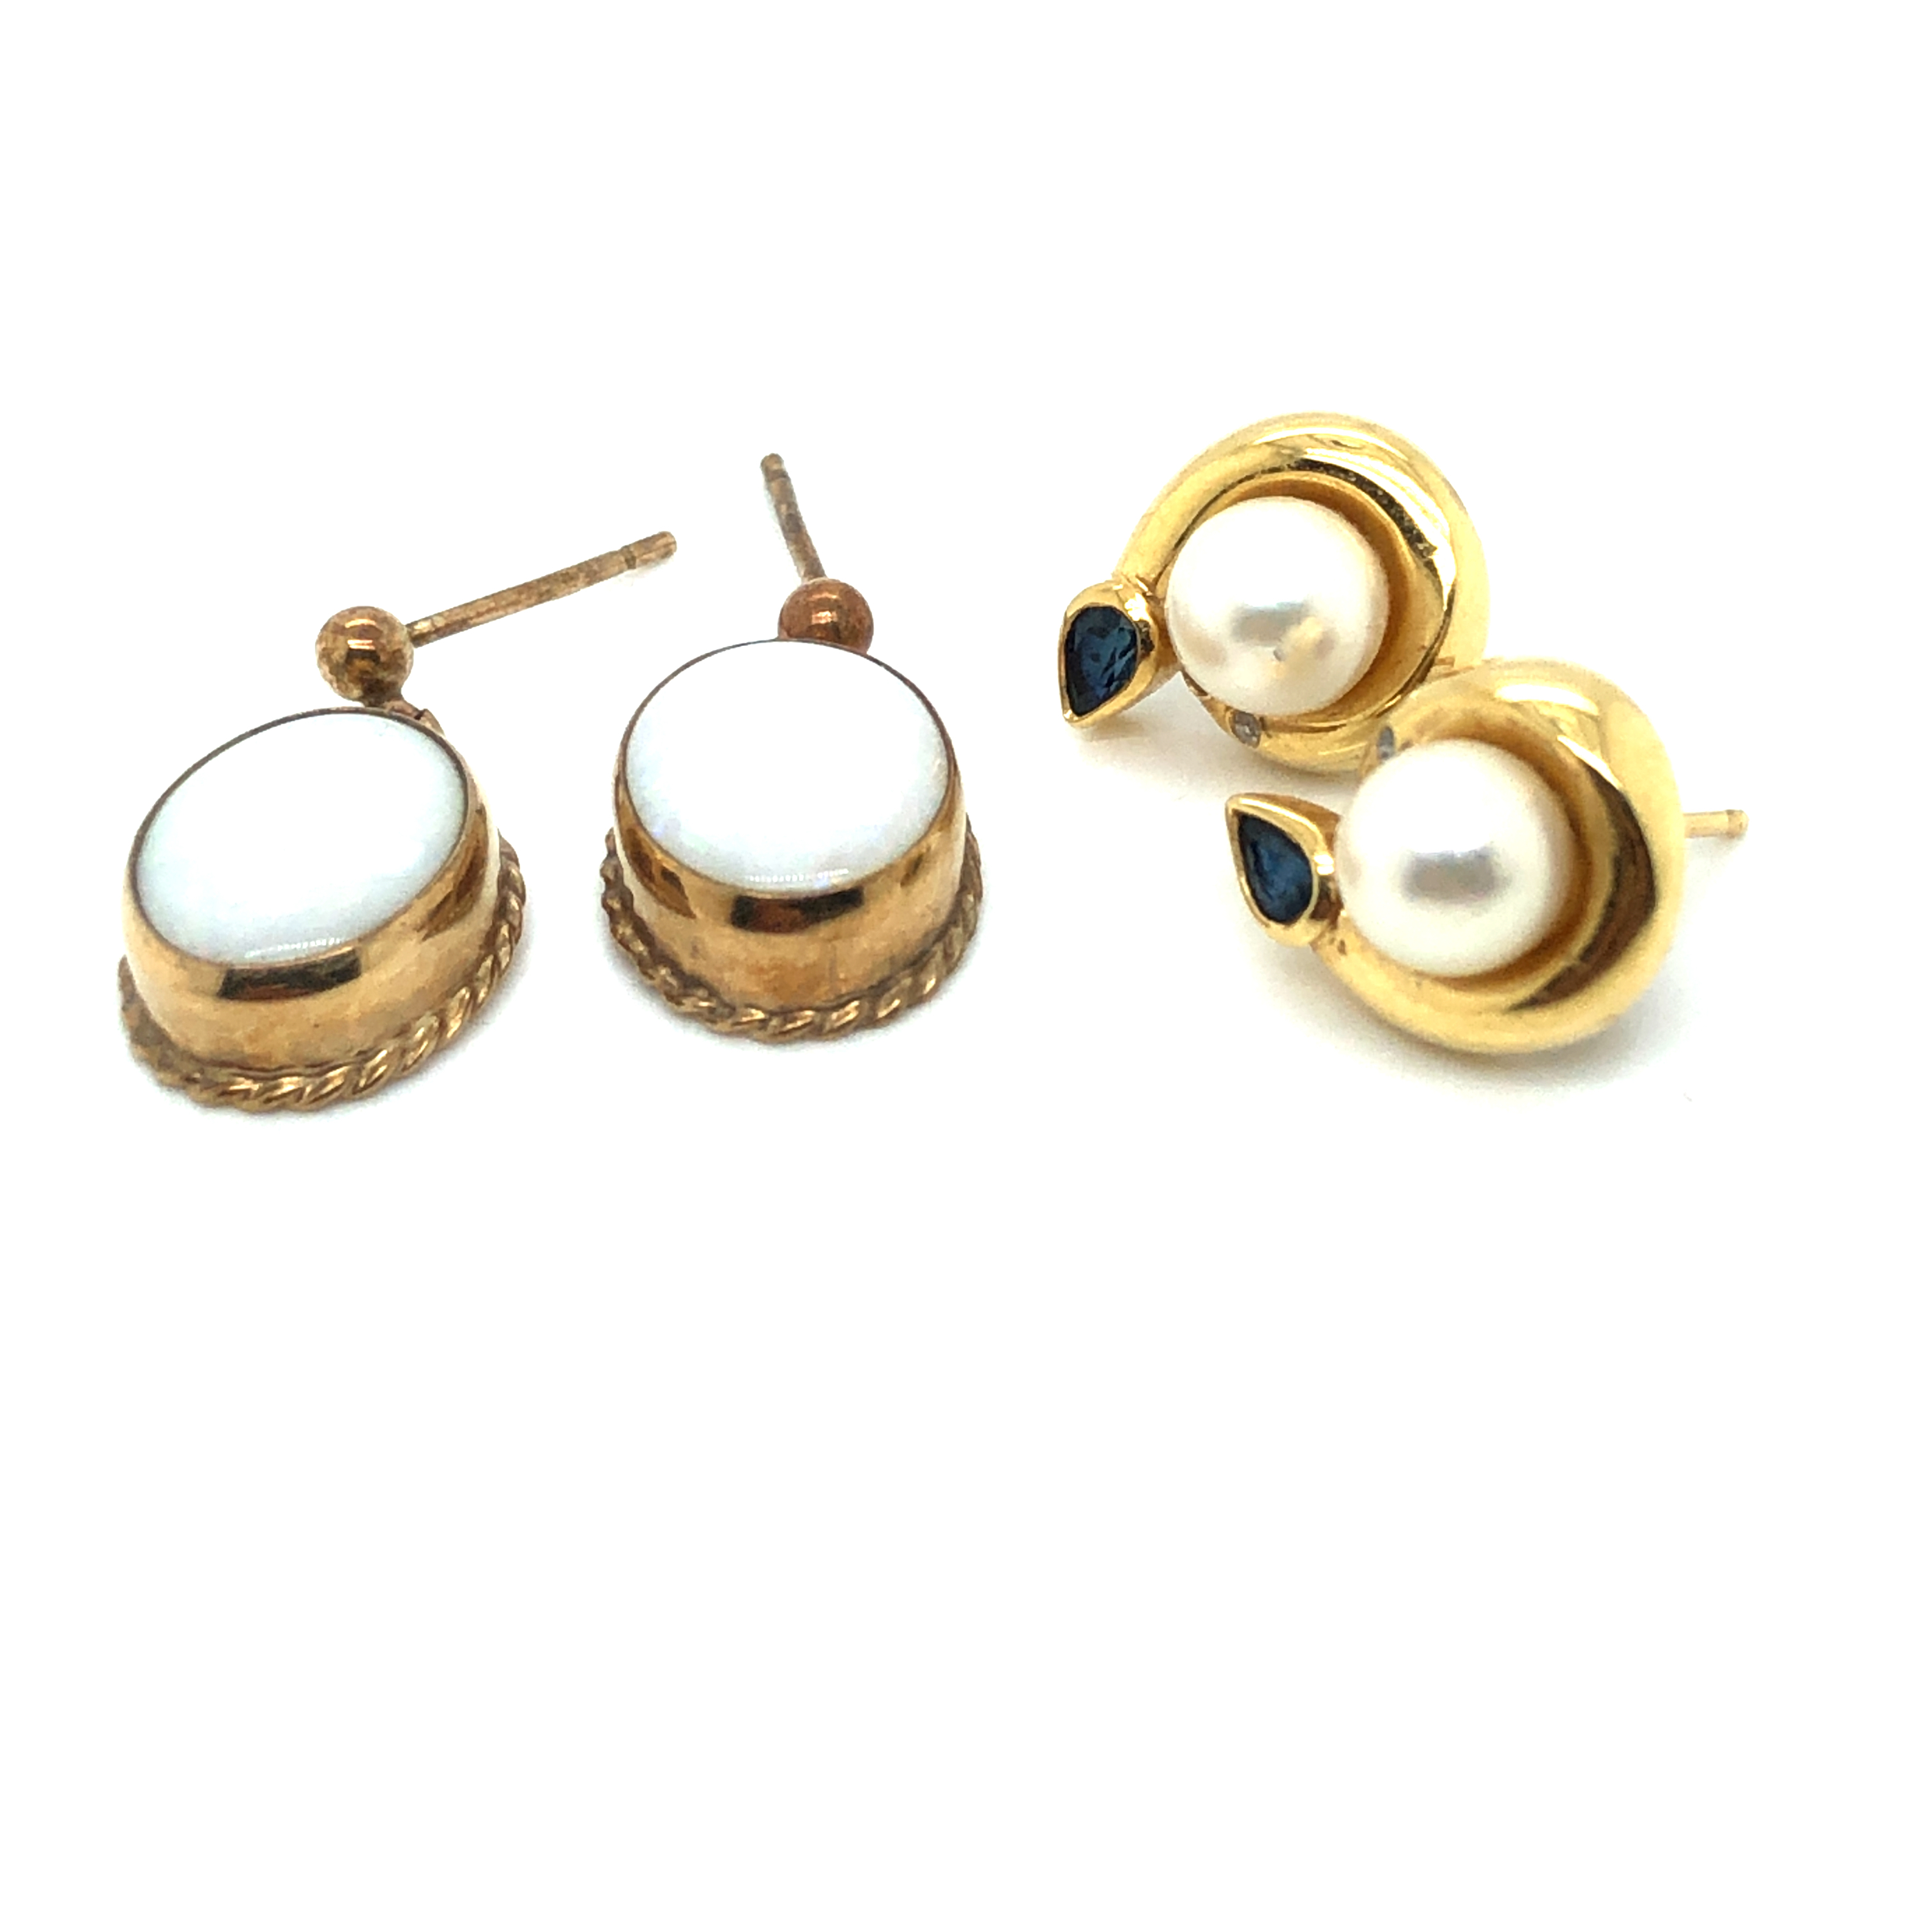 A PAIR OF CULTURED PEARL, SAPPHIRE AND DIAMOND CONTEMPORARY STUD EARRINGS, NO ASSAY MARKS,